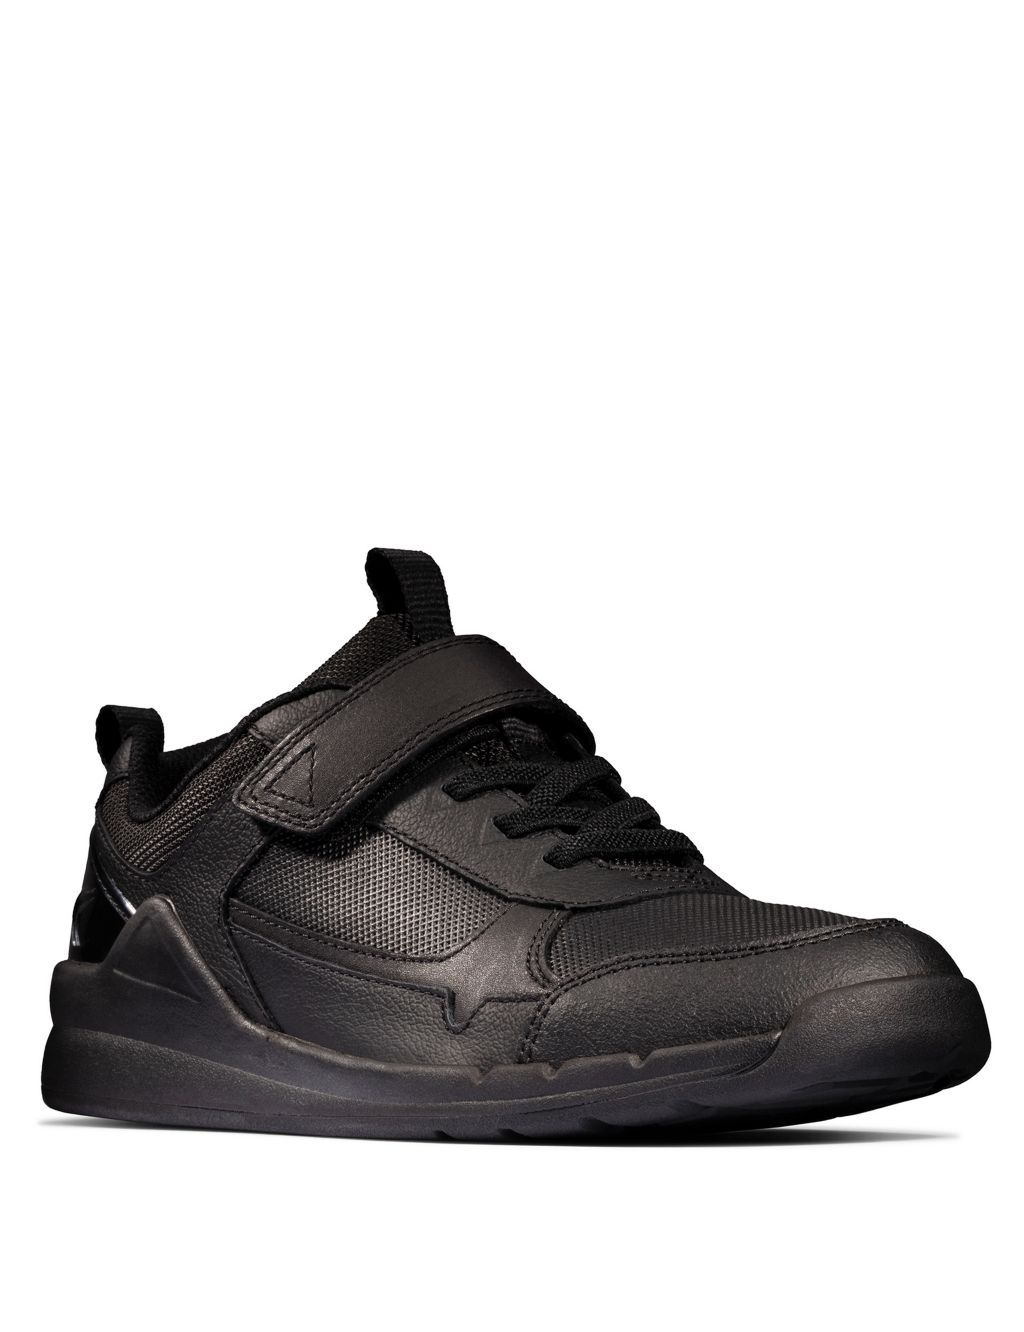 Kids' Leather Riptape Trainers (Youth size 3-8) image 1